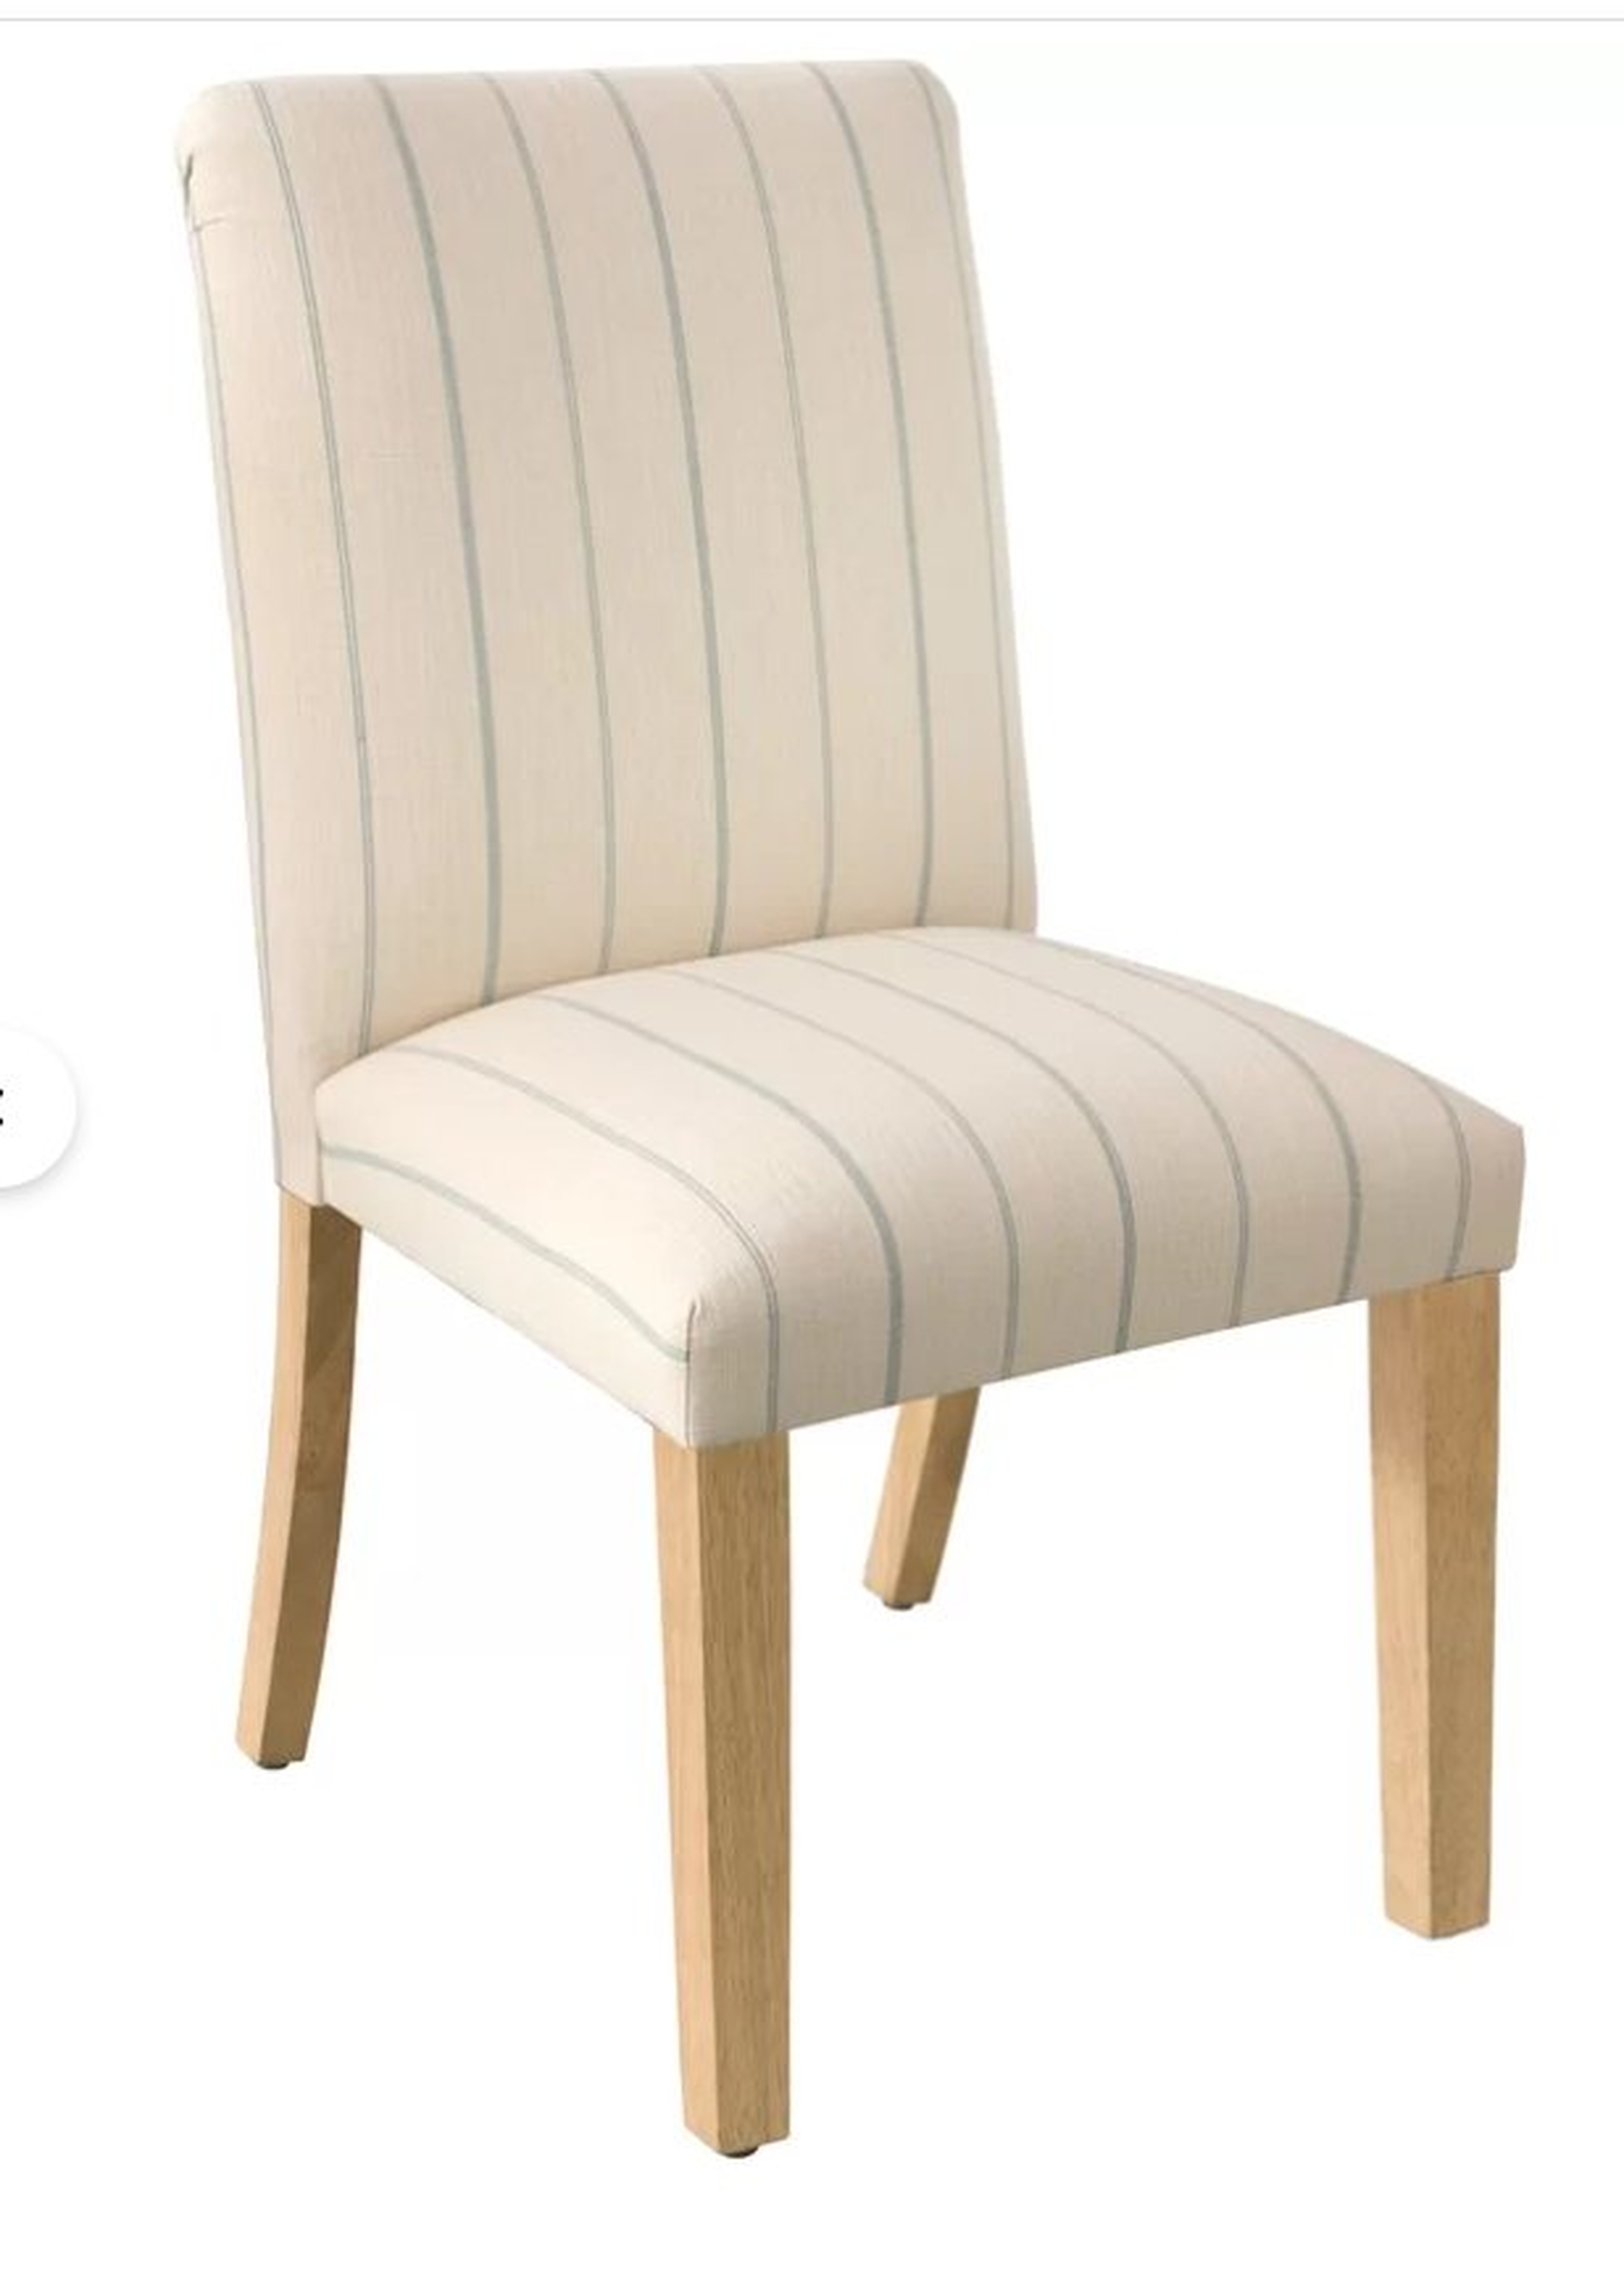 Holden Heights Upholstered Dining chair - Wayfair